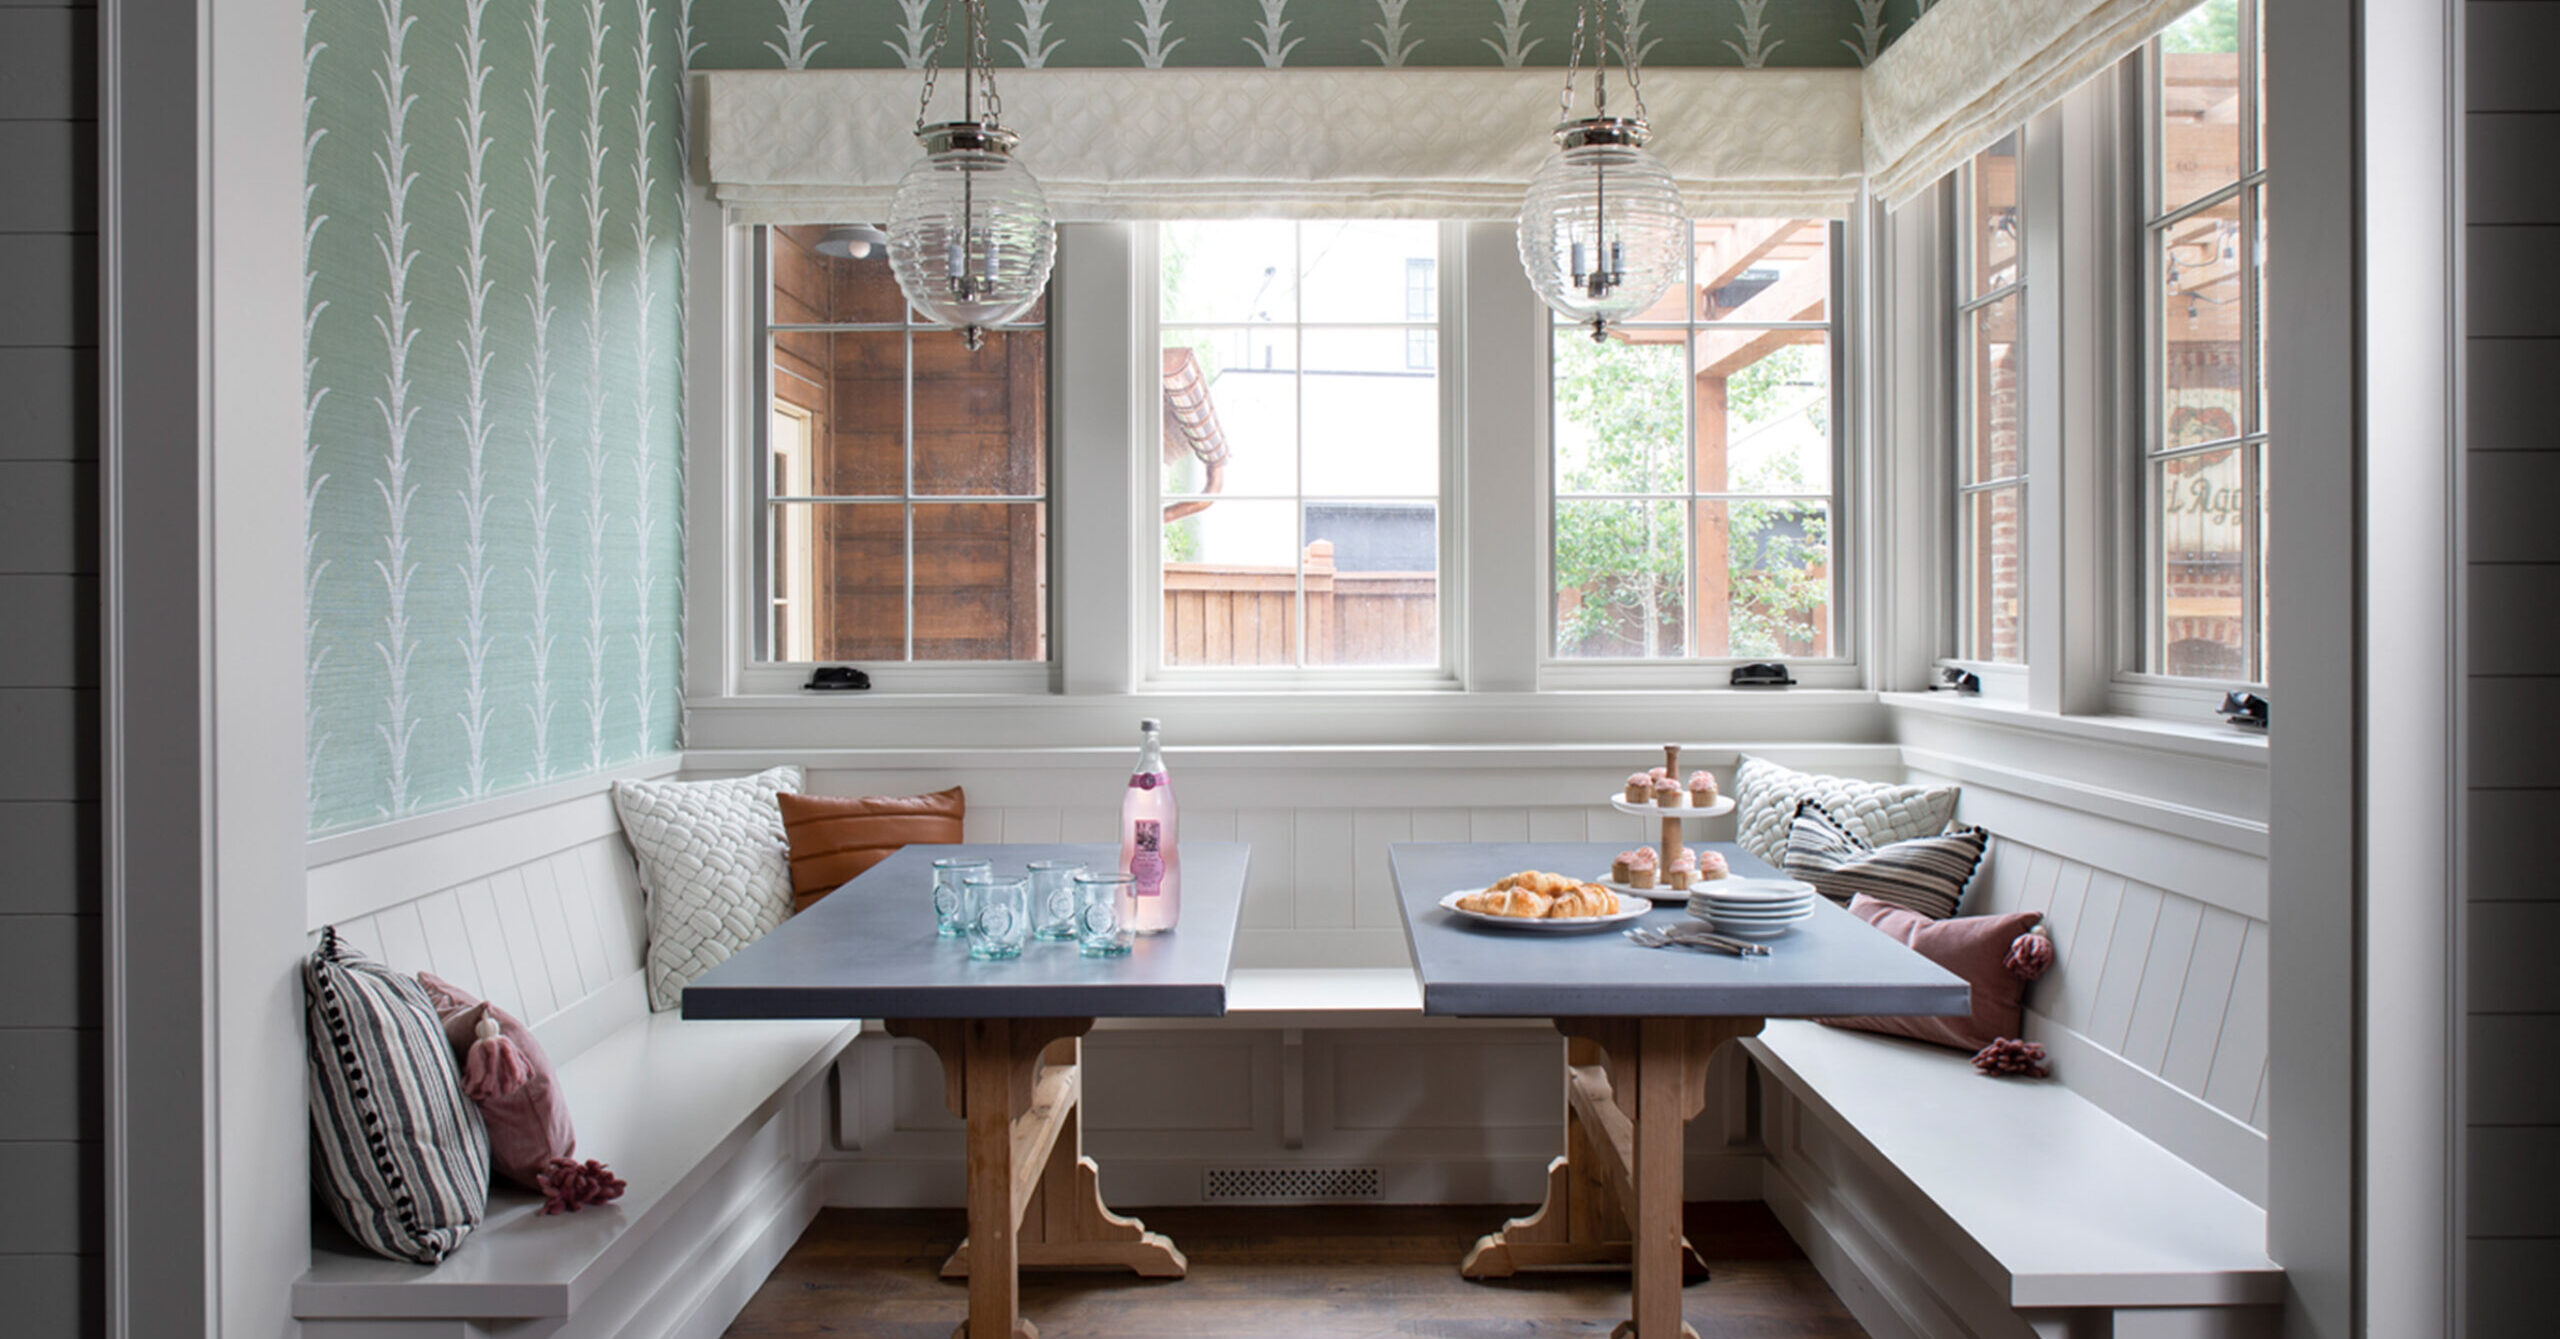 breakfast nook with wrap around bench seating